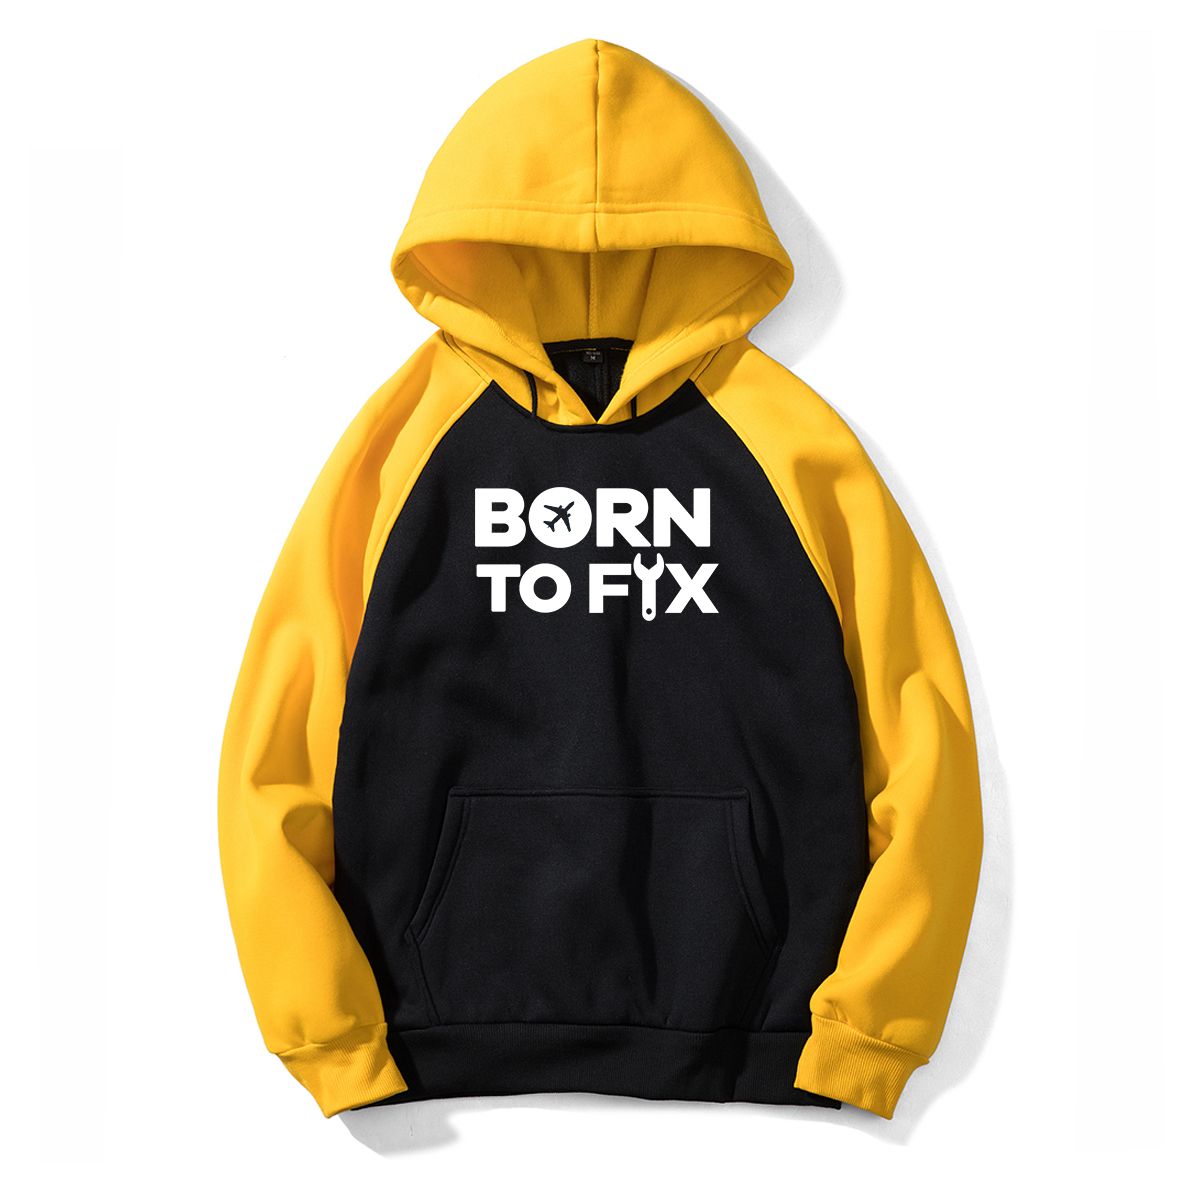 Born To Fix Airplanes Designed Colourful Hoodies